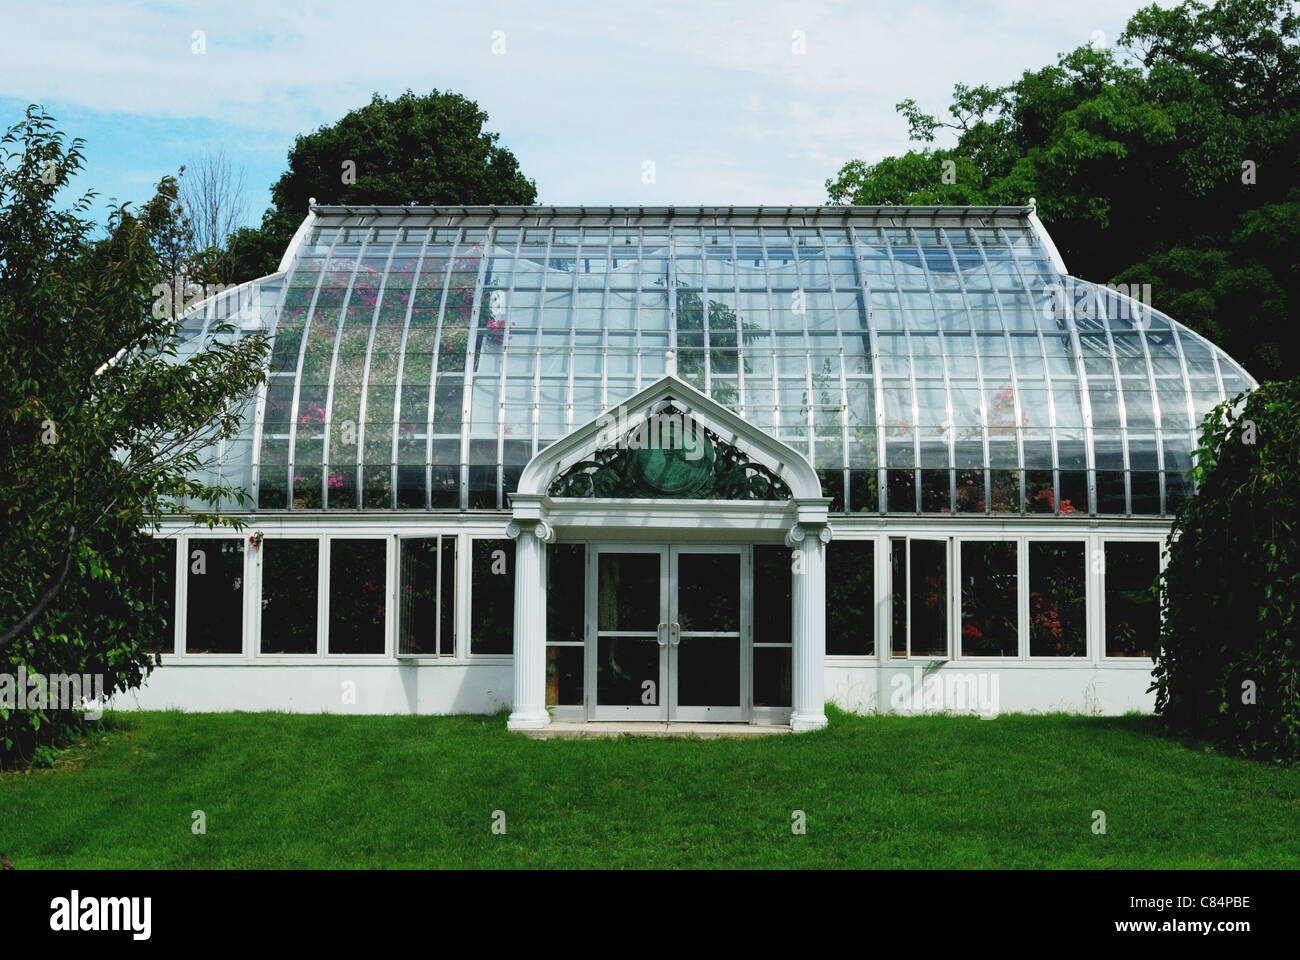 Hot house plant conservatory at Highland Park, Rochester, New York US Stock Photo